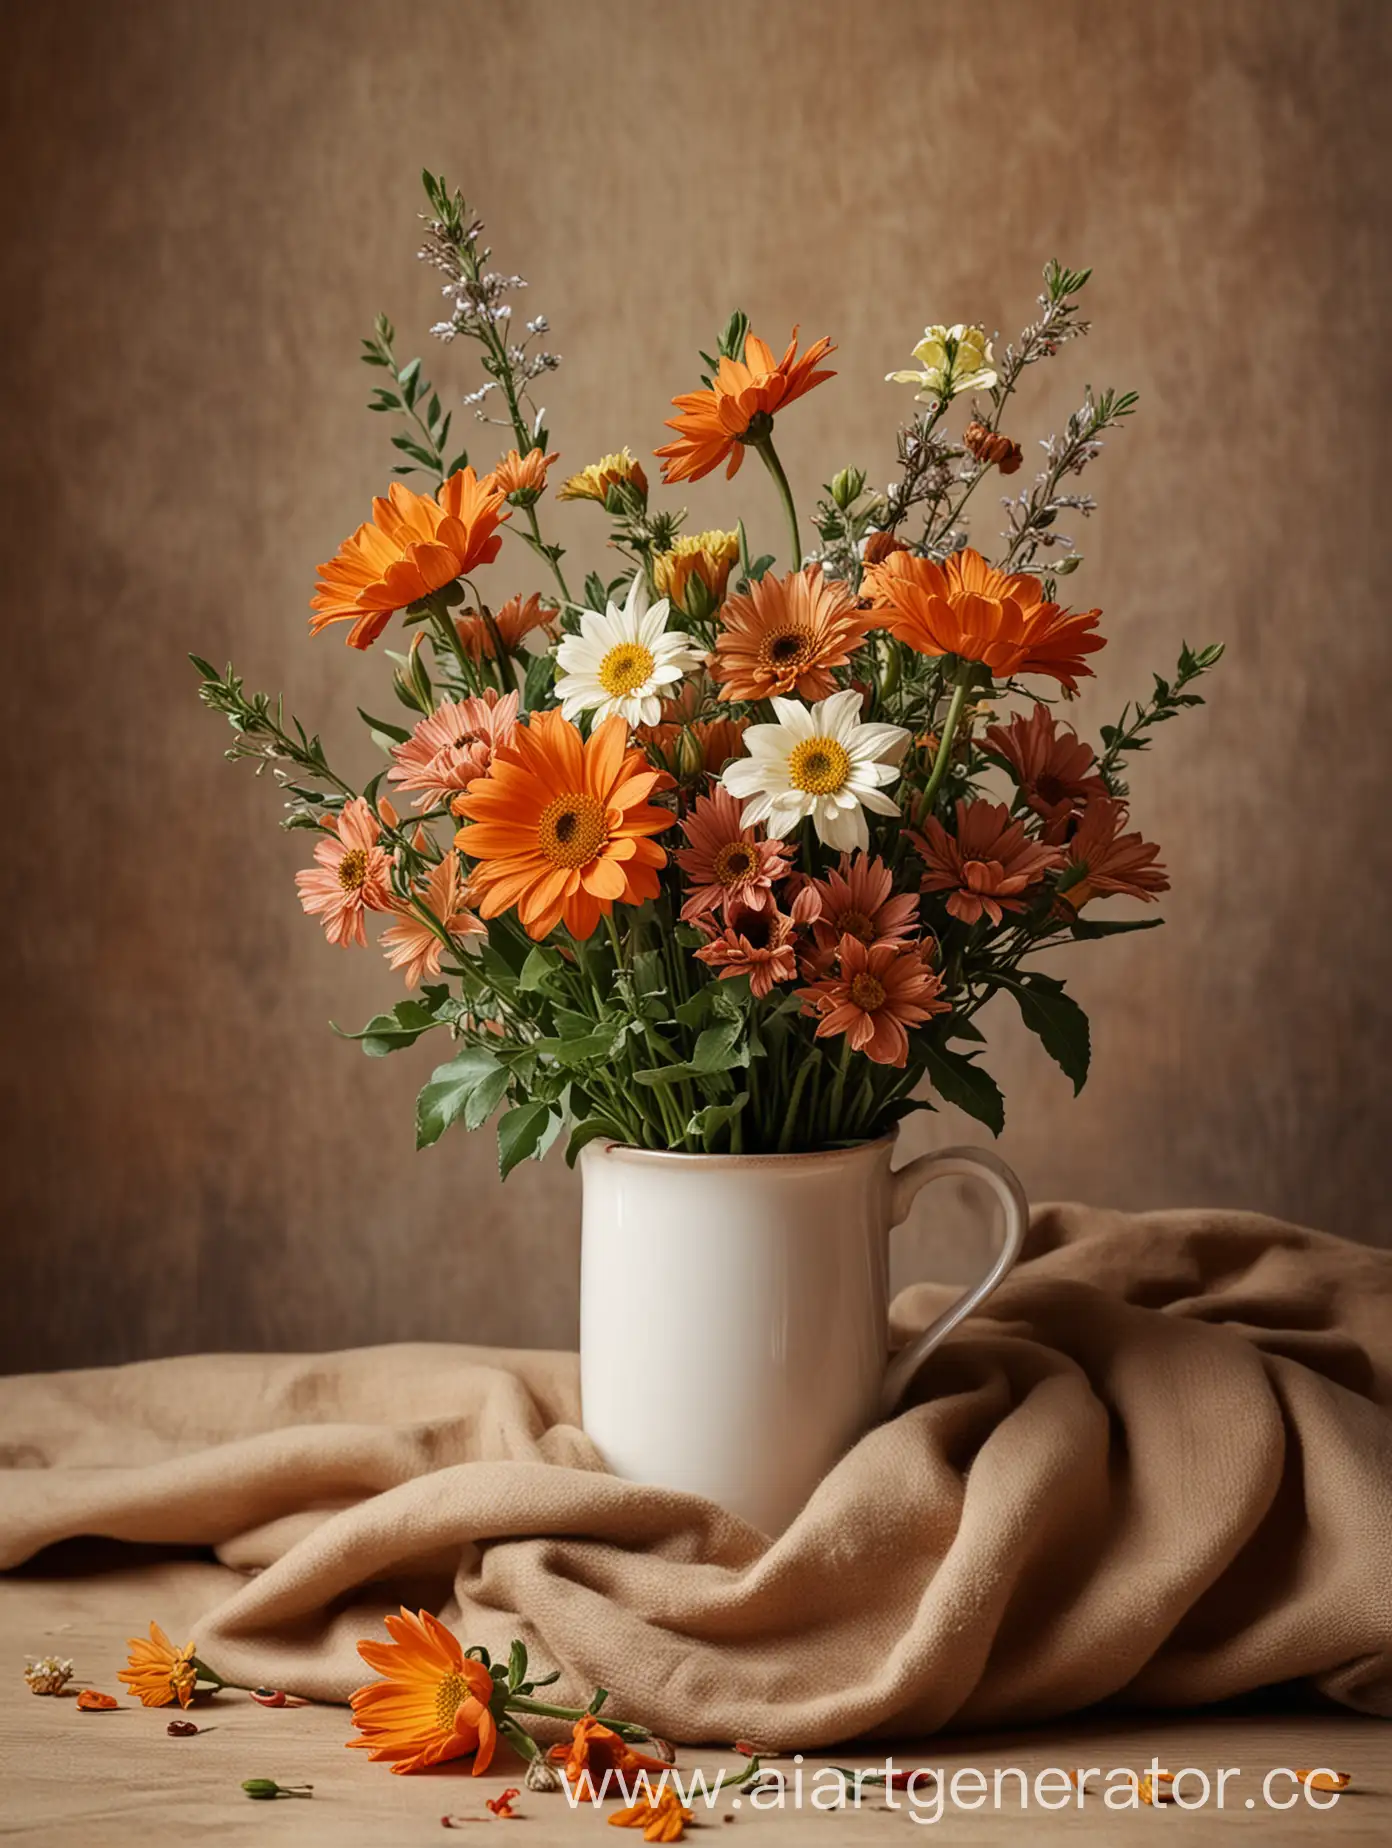 Warm-Tones-Still-Life-with-Flowers-and-a-Mug